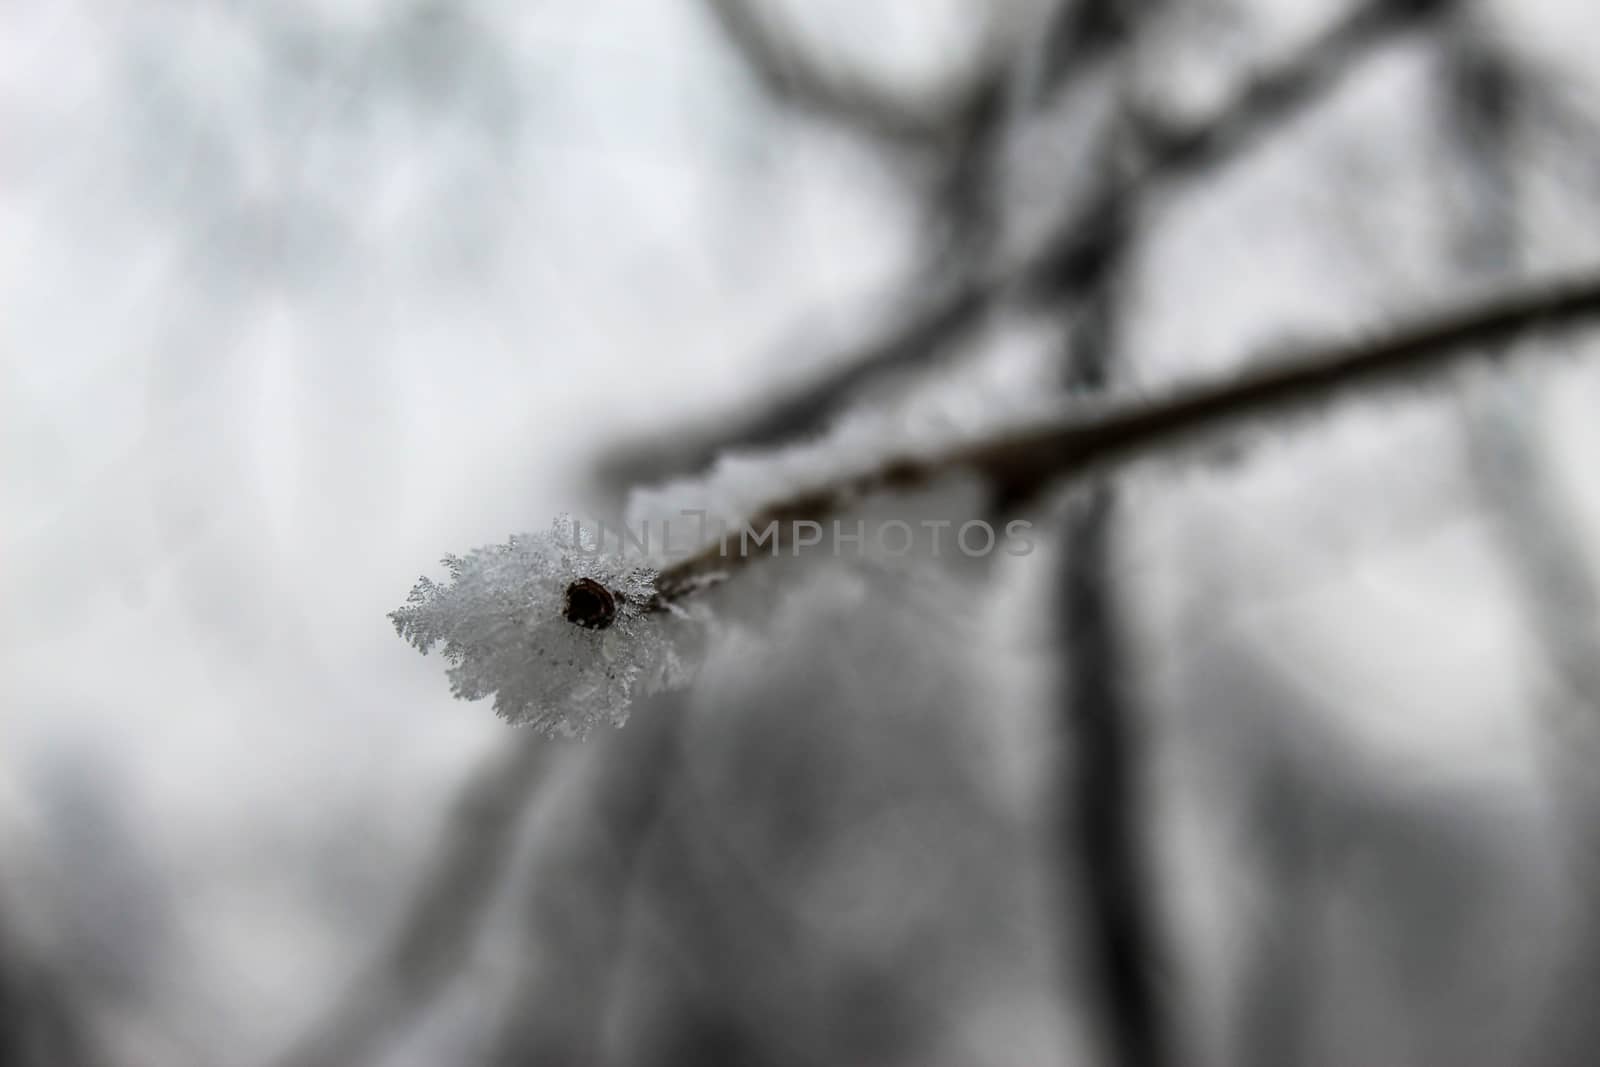 Hoarfrost on a twig on a tree in winter. Very cold. Sarajevo, Bosnia and Herzegovina. by mahirrov